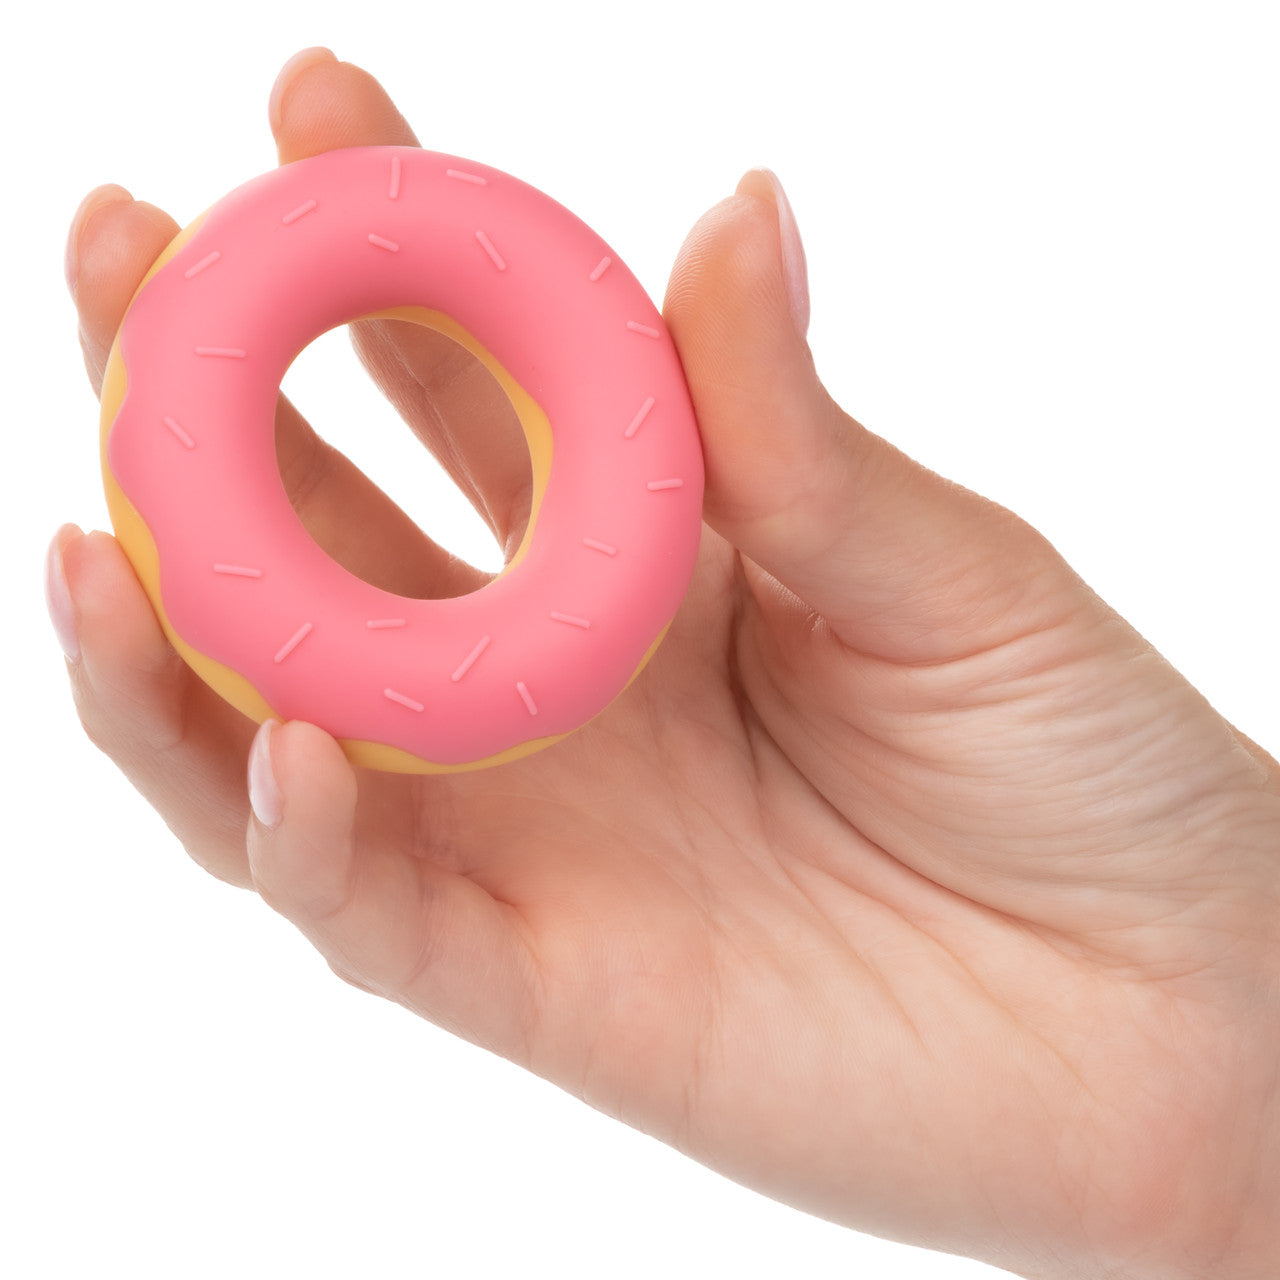 A hand holding the Dickin Donuts Silicone Cock Ring.